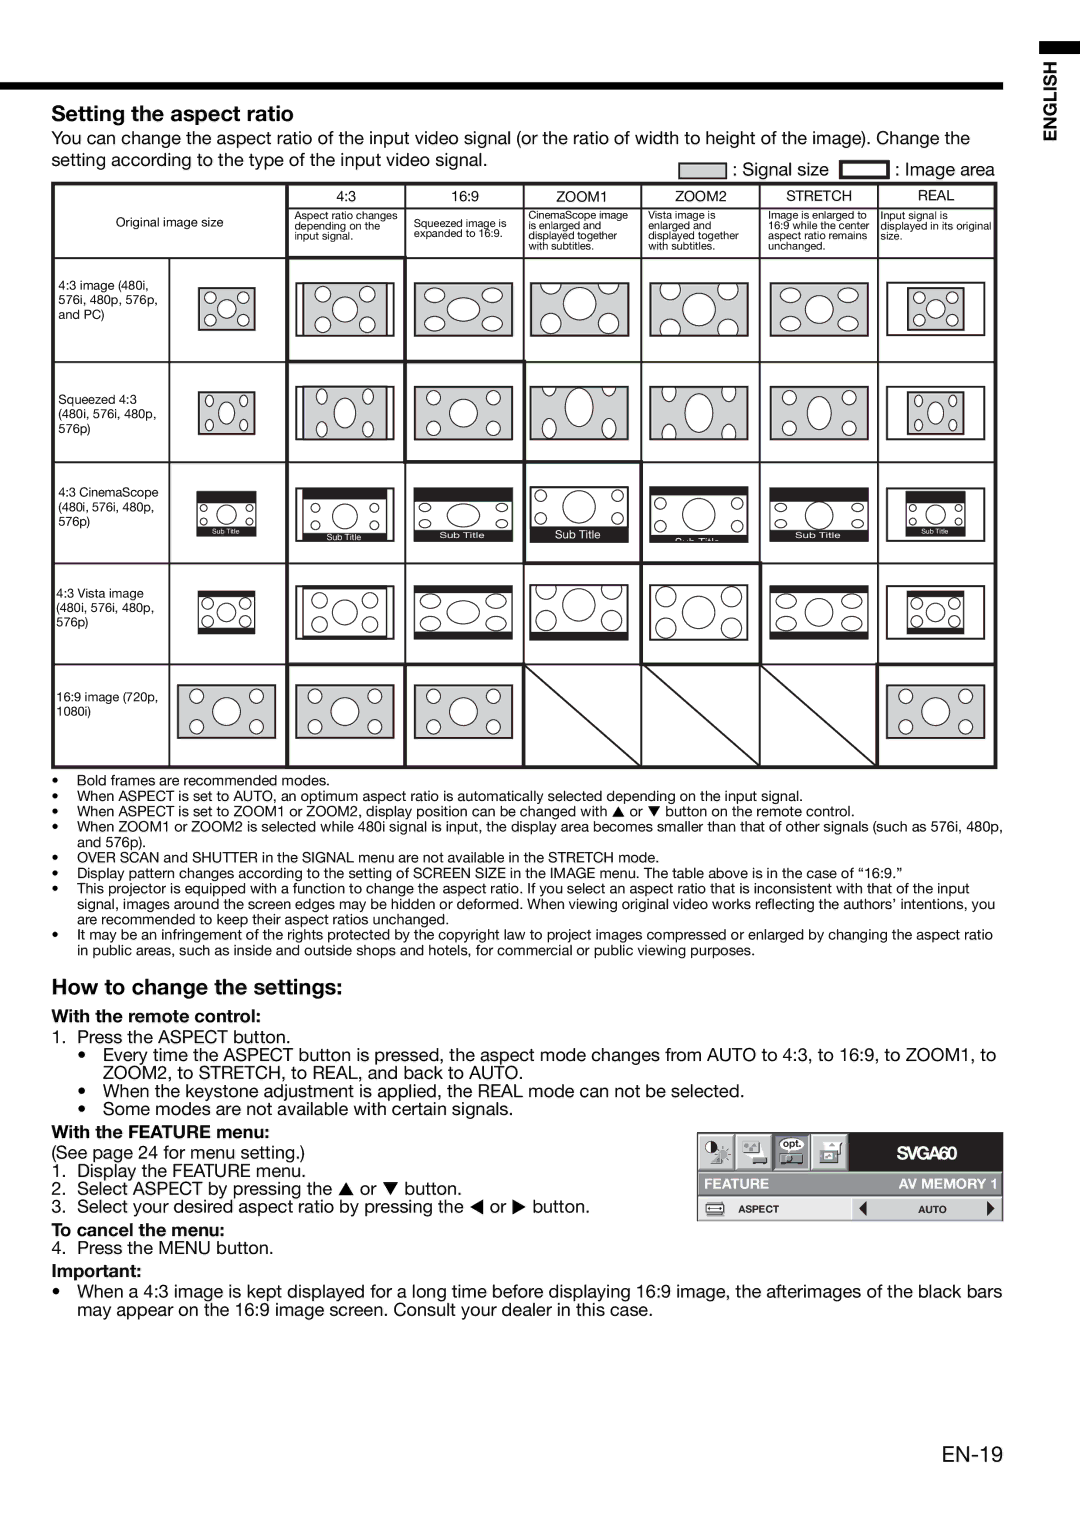 Mitsubishi Electronics HD1000 user manual Setting the aspect ratio, How to change the settings, With the remote control 